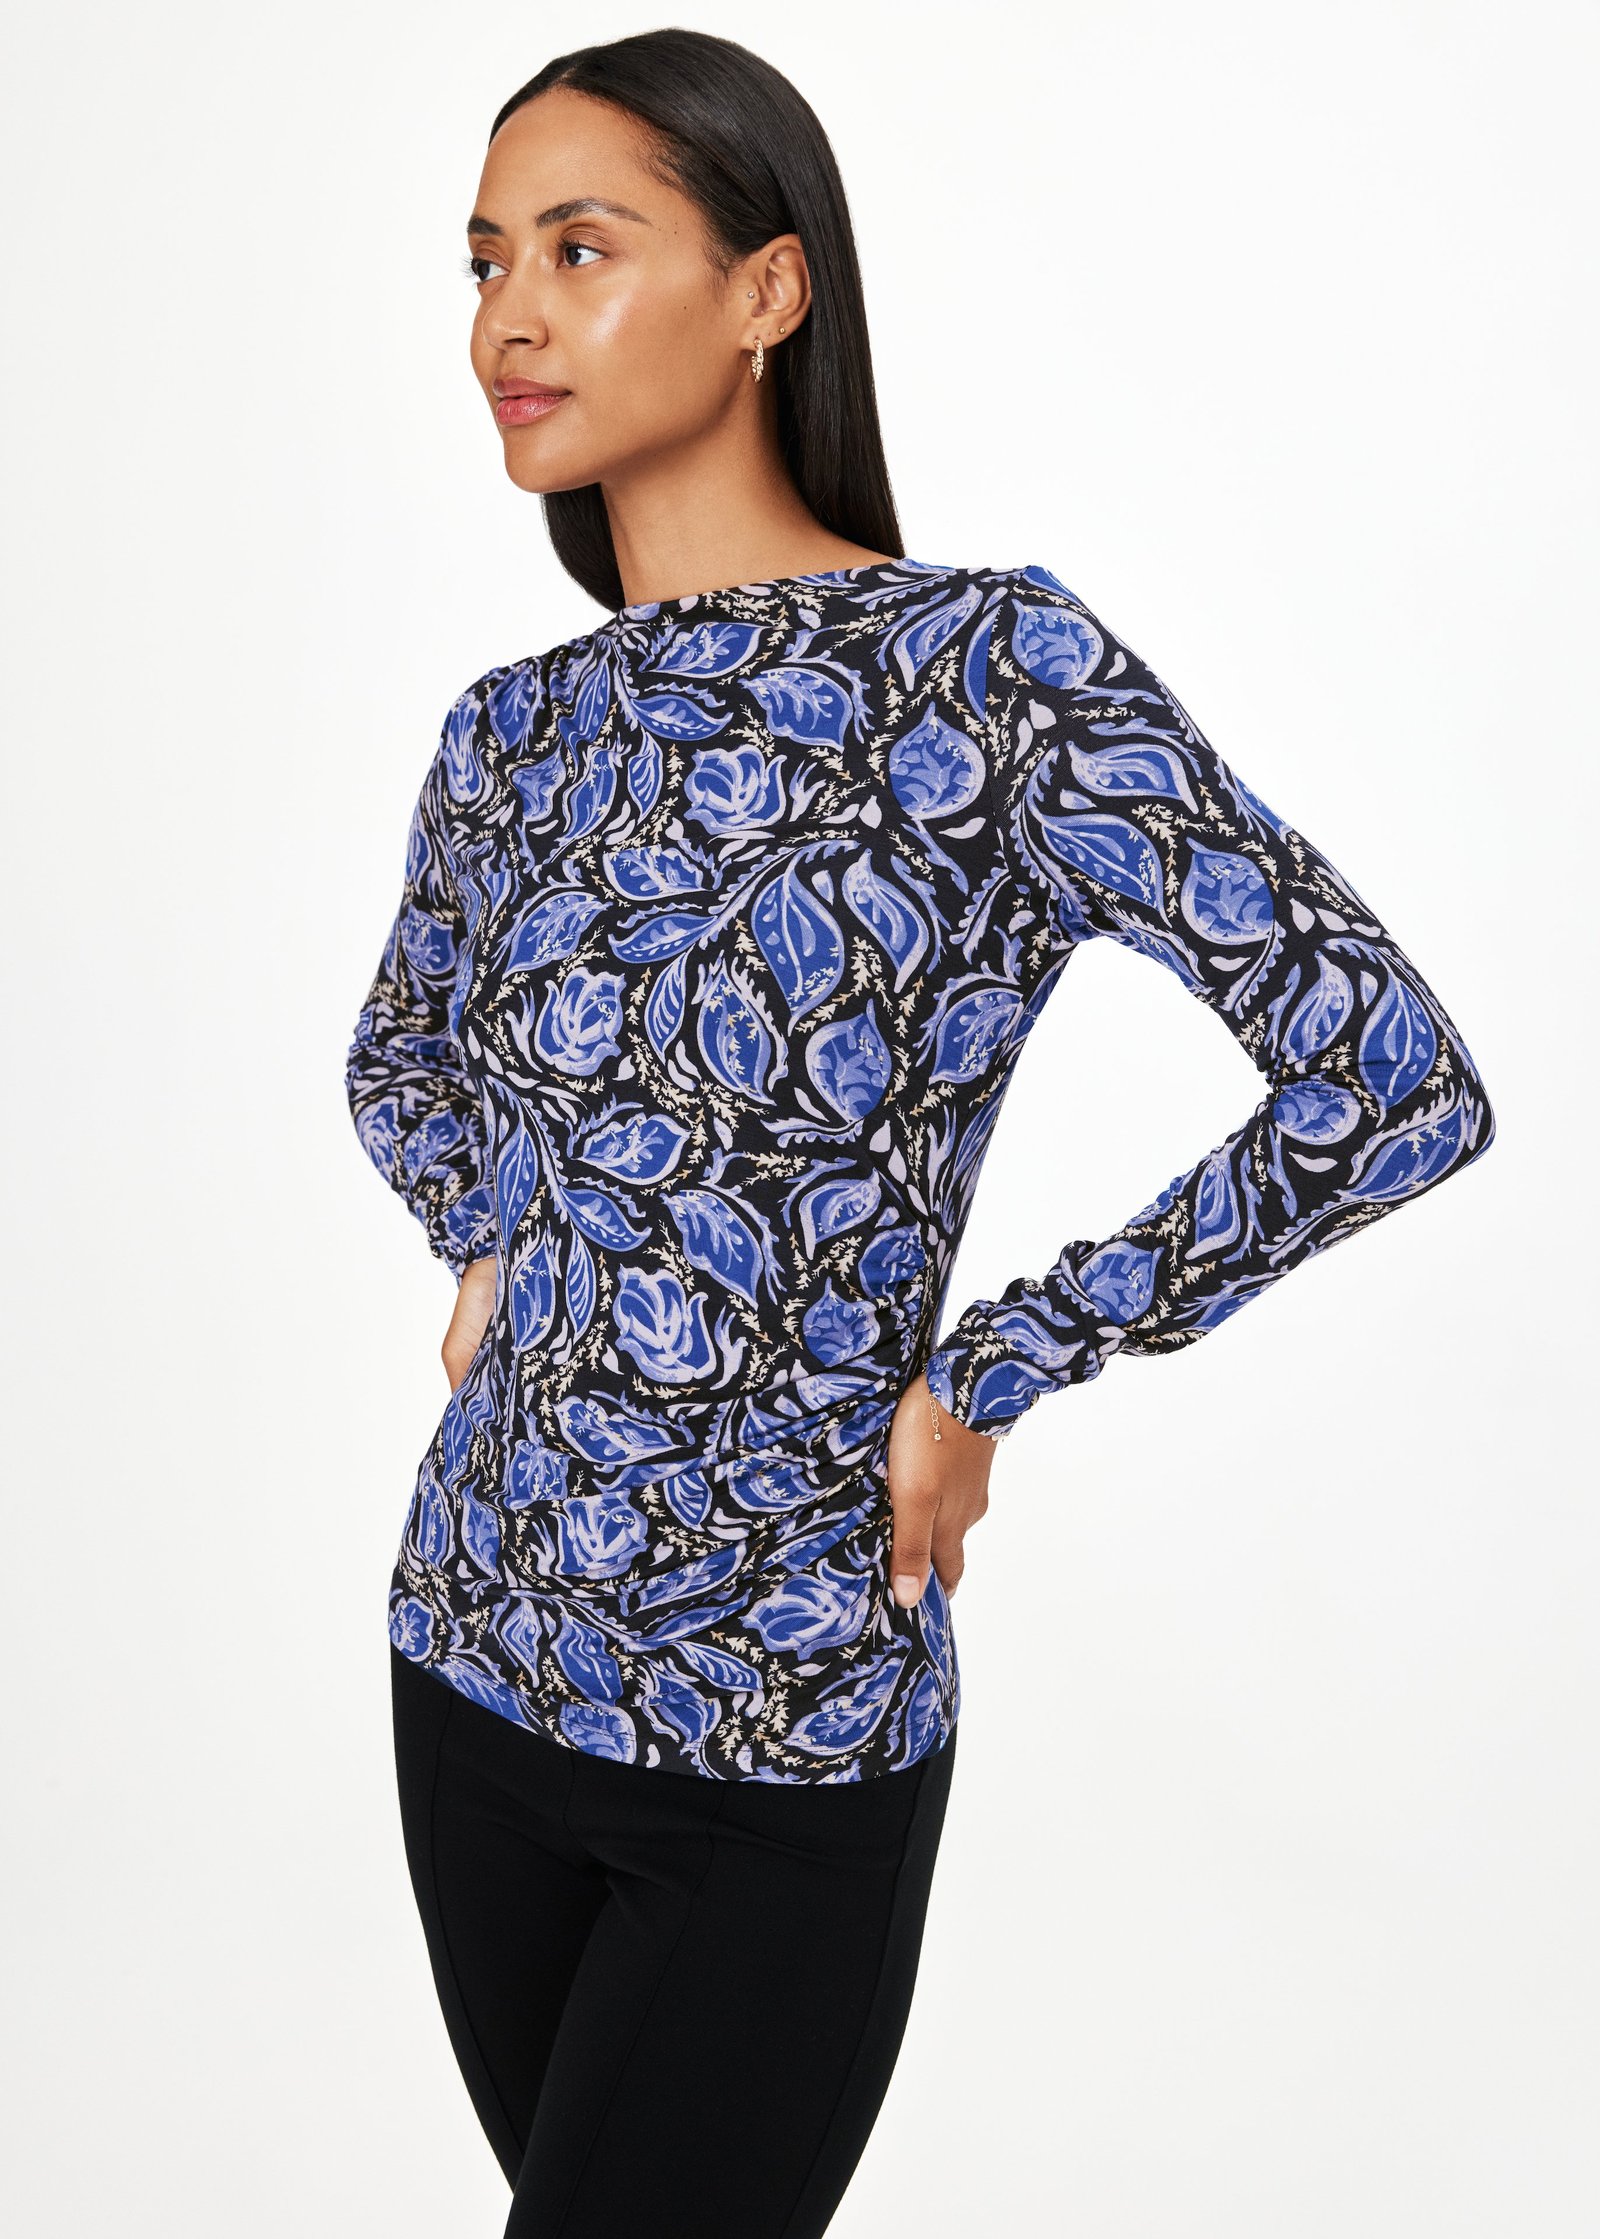 Gathered patterned top